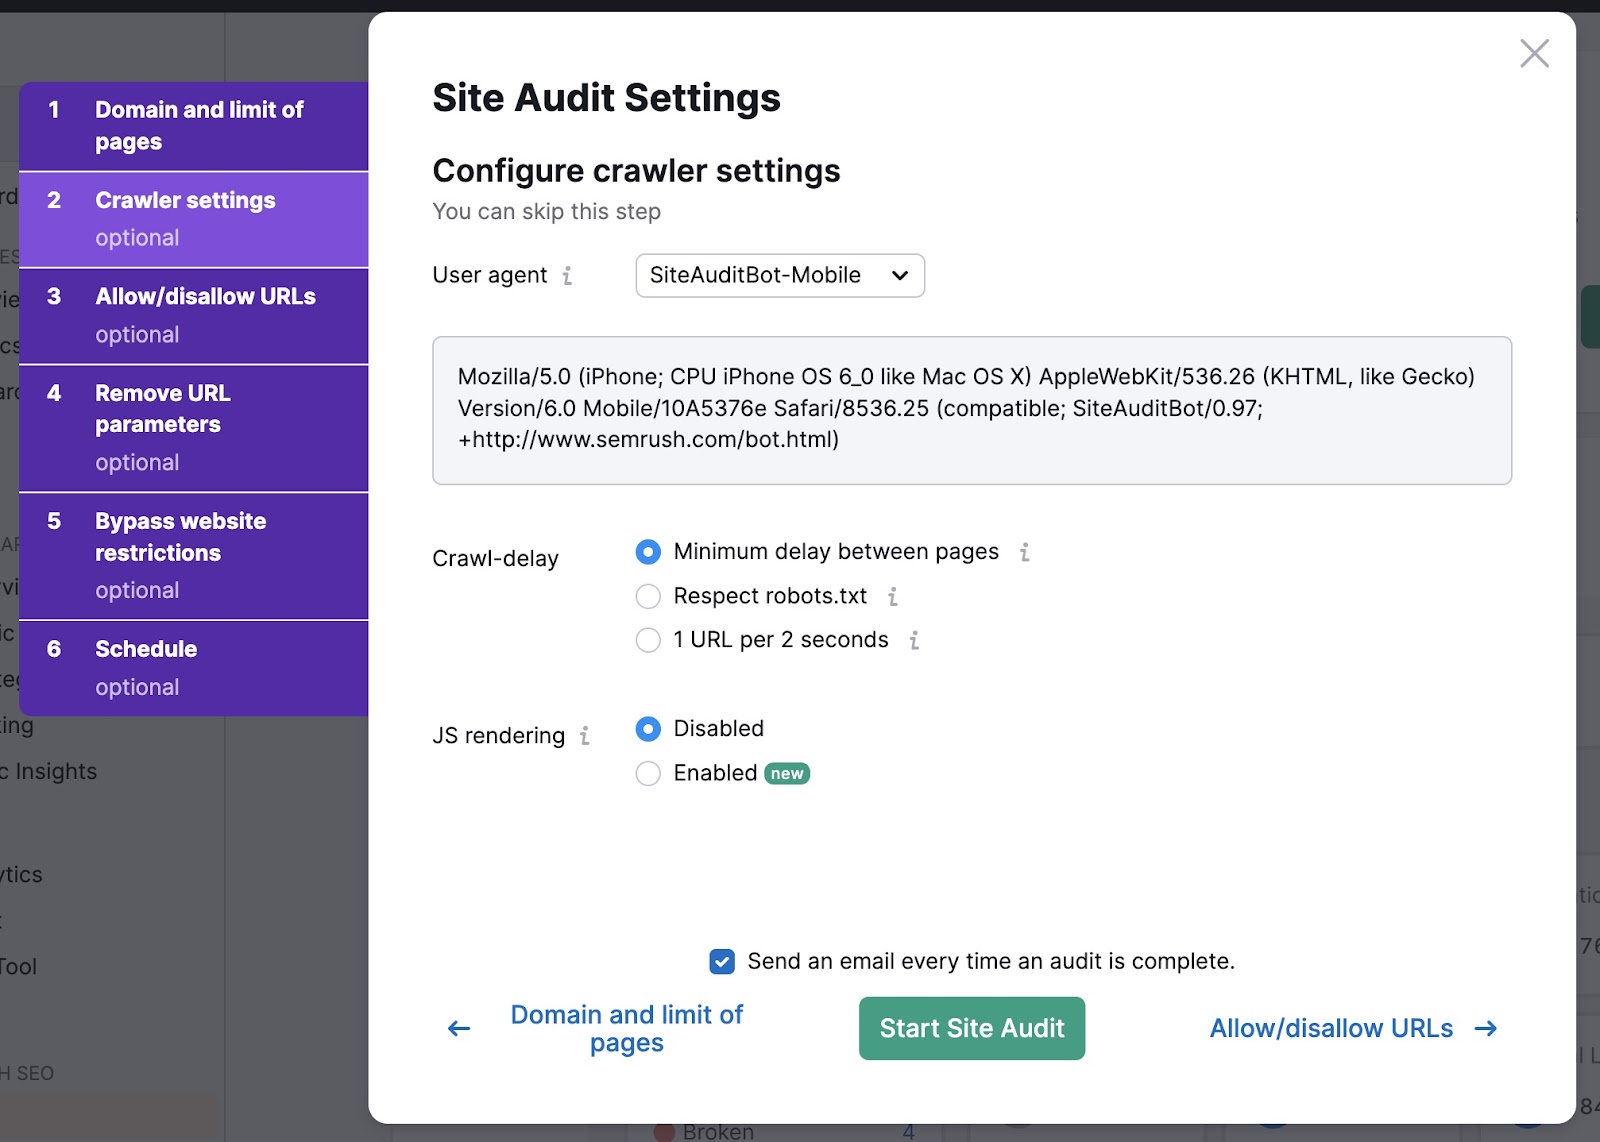 Crawler settings page on Site Audit to set user agent, crawl delay, and JS rendering.